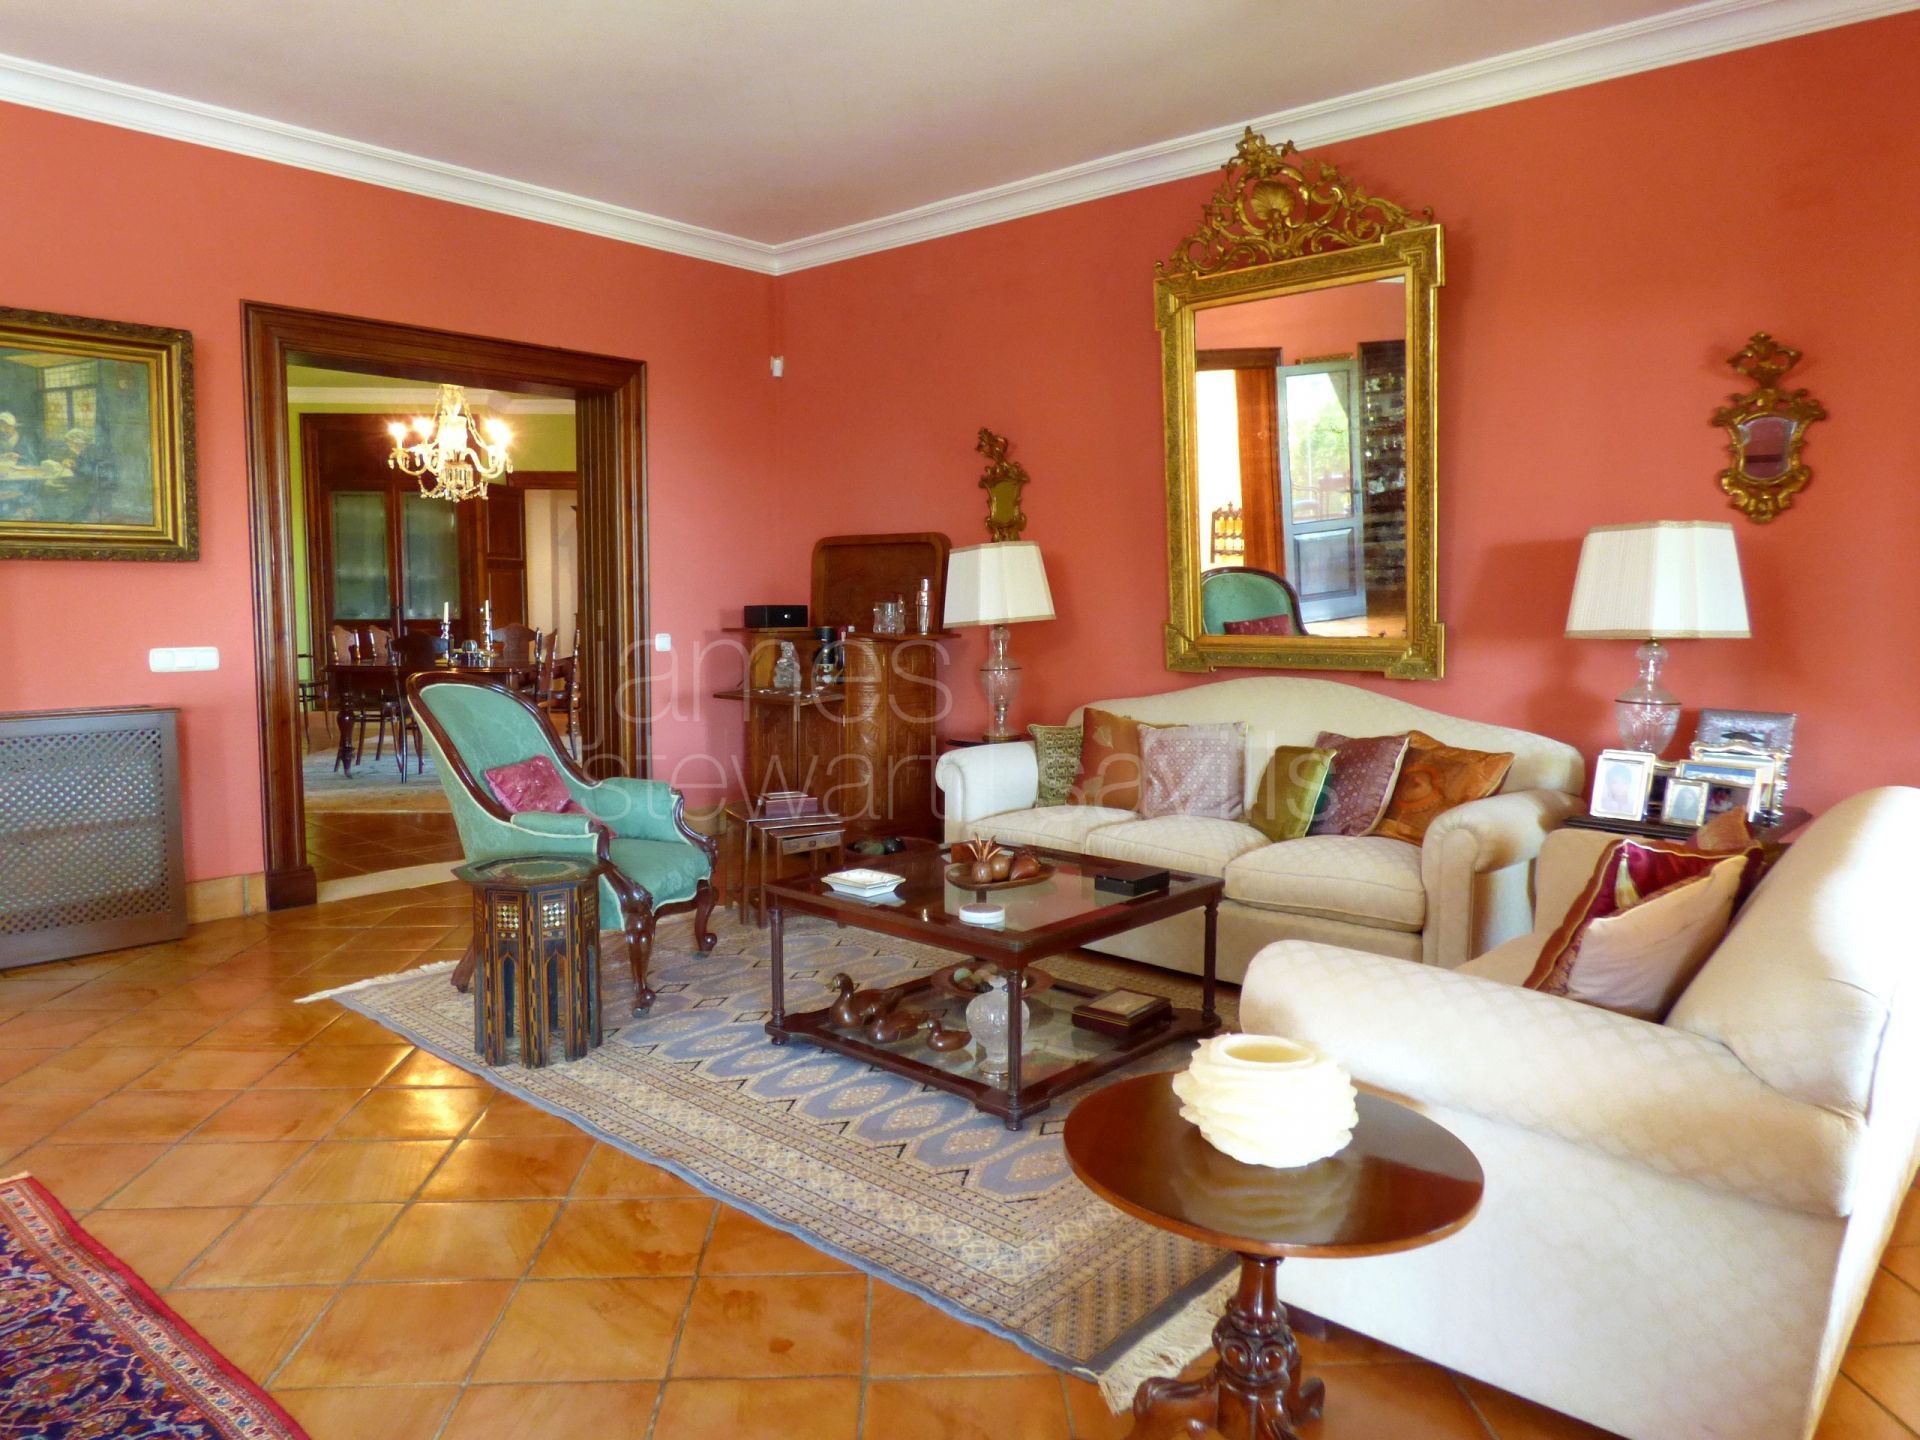 Extremely high quality house, private with sweeping open views of La Reserva